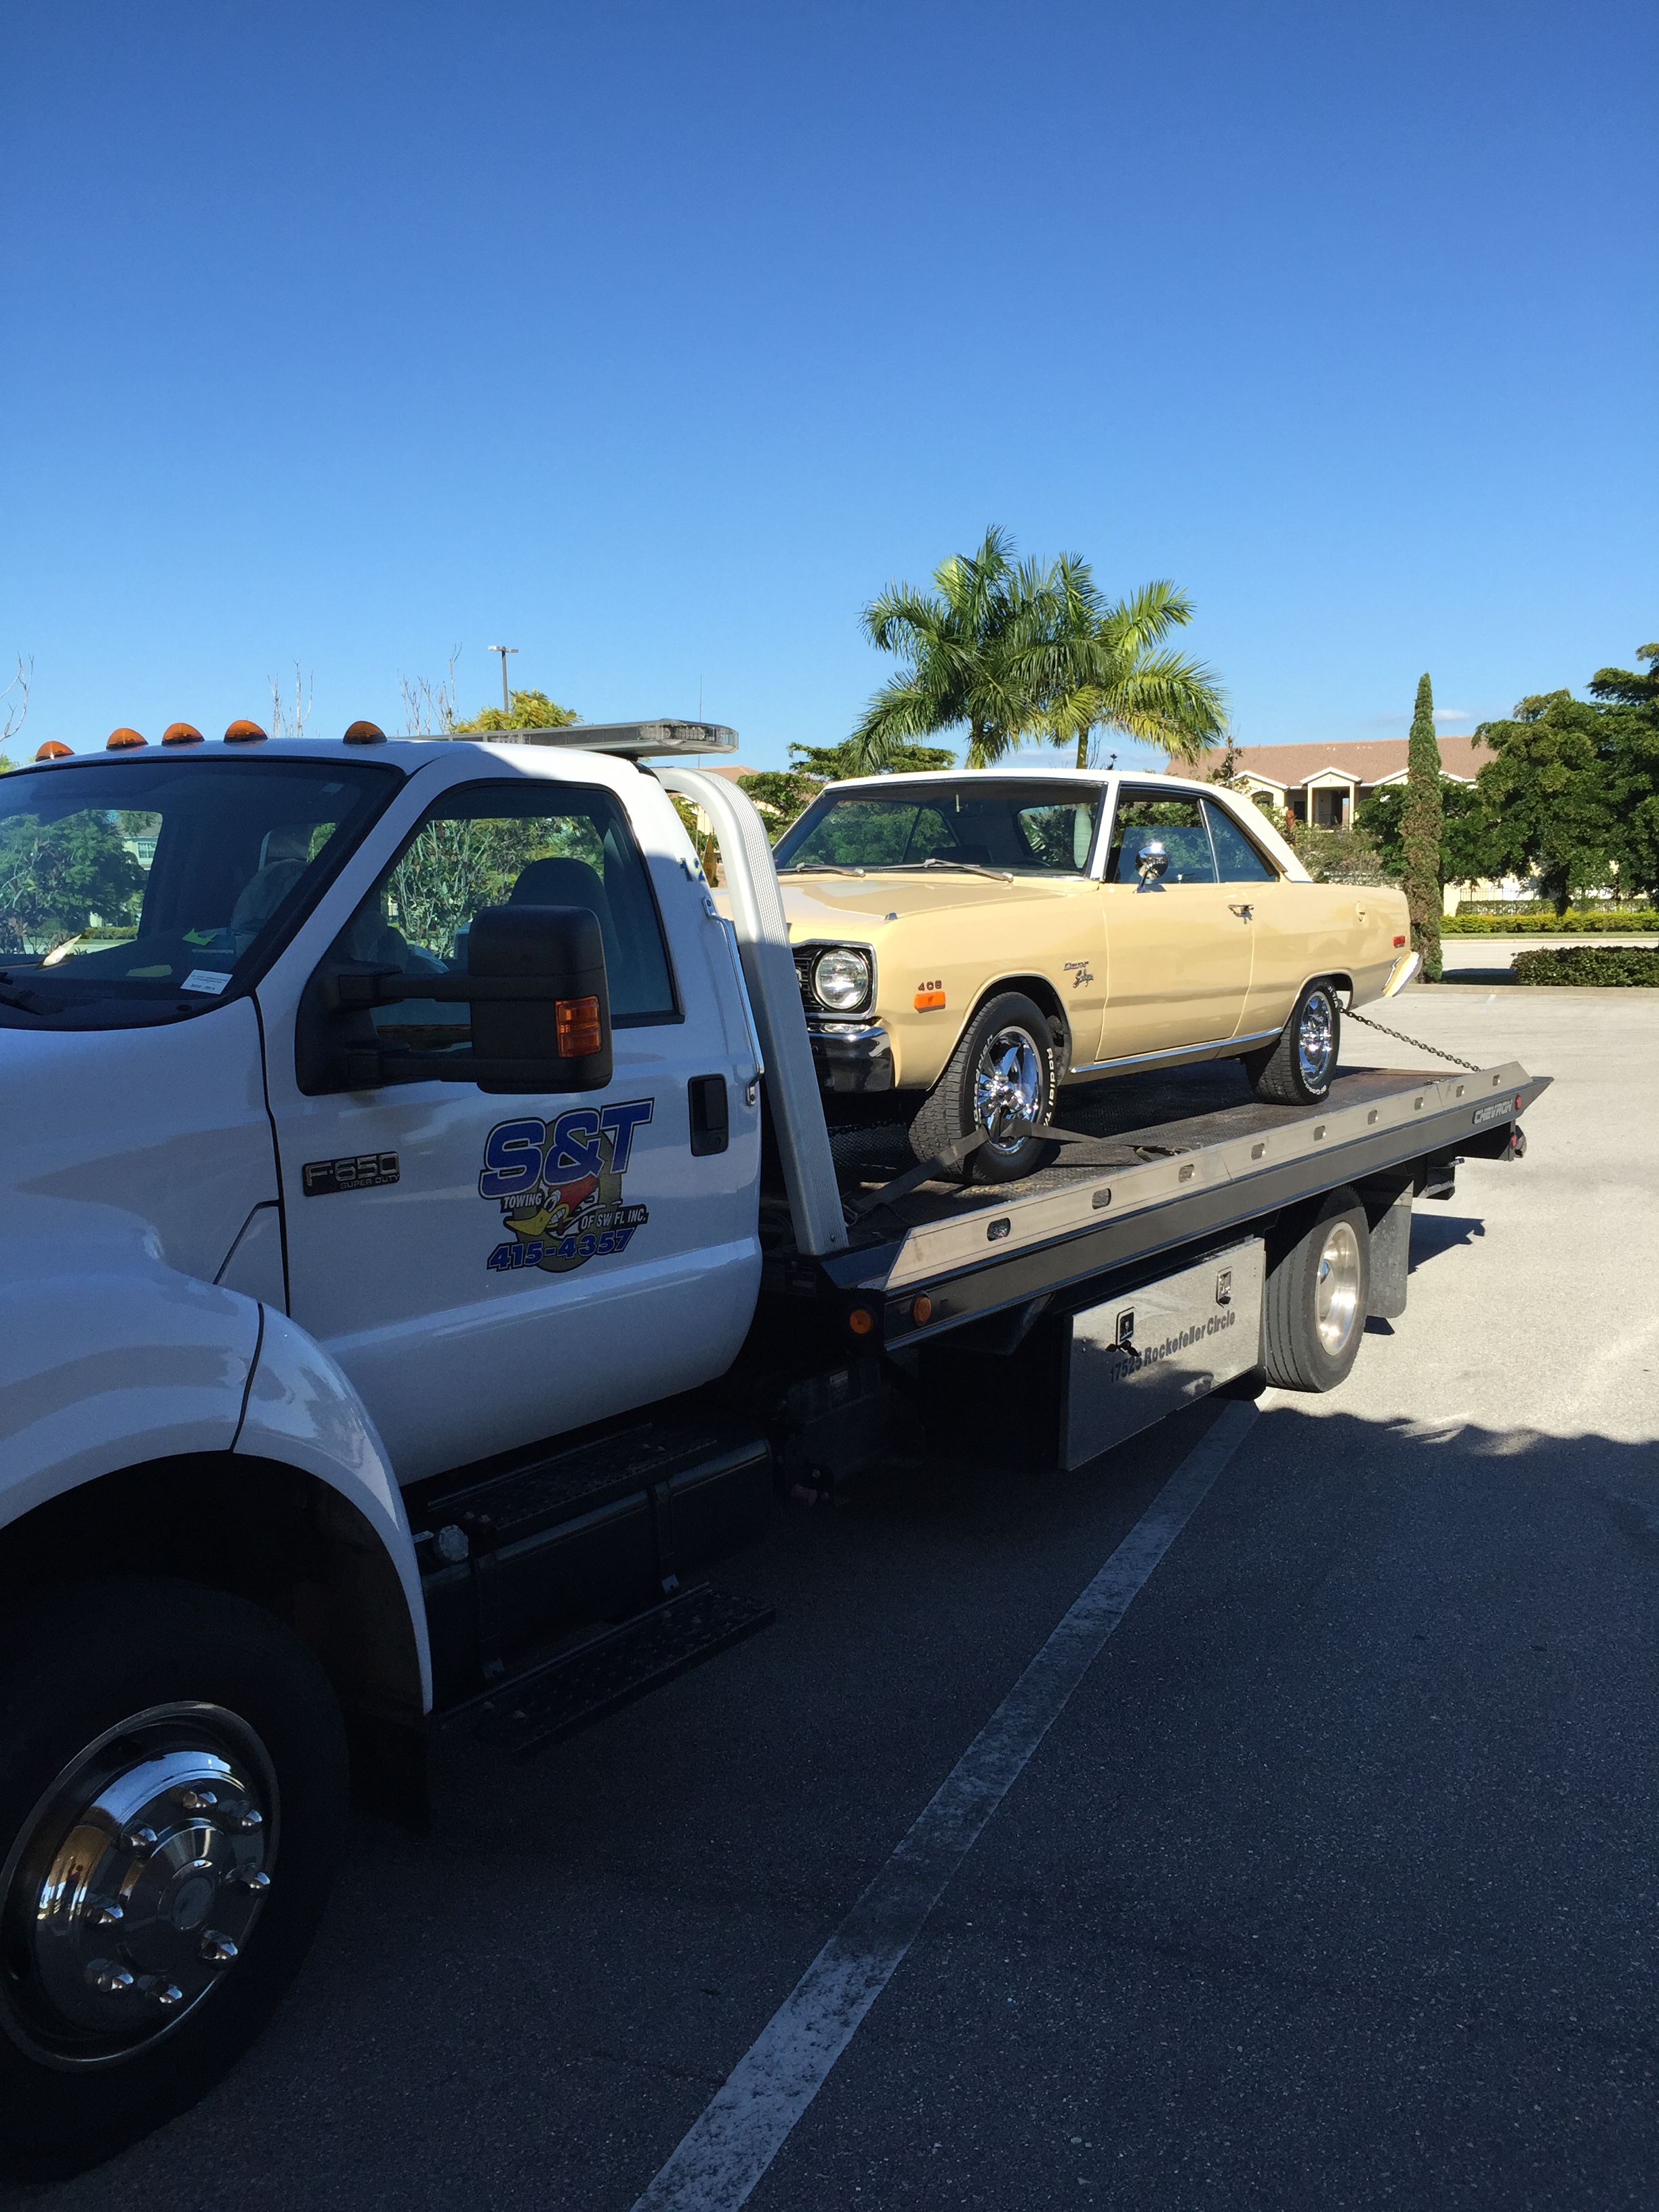 Fast, professional flatbed towing service in Fort Myers, Estero, and Bonita Springs, FL